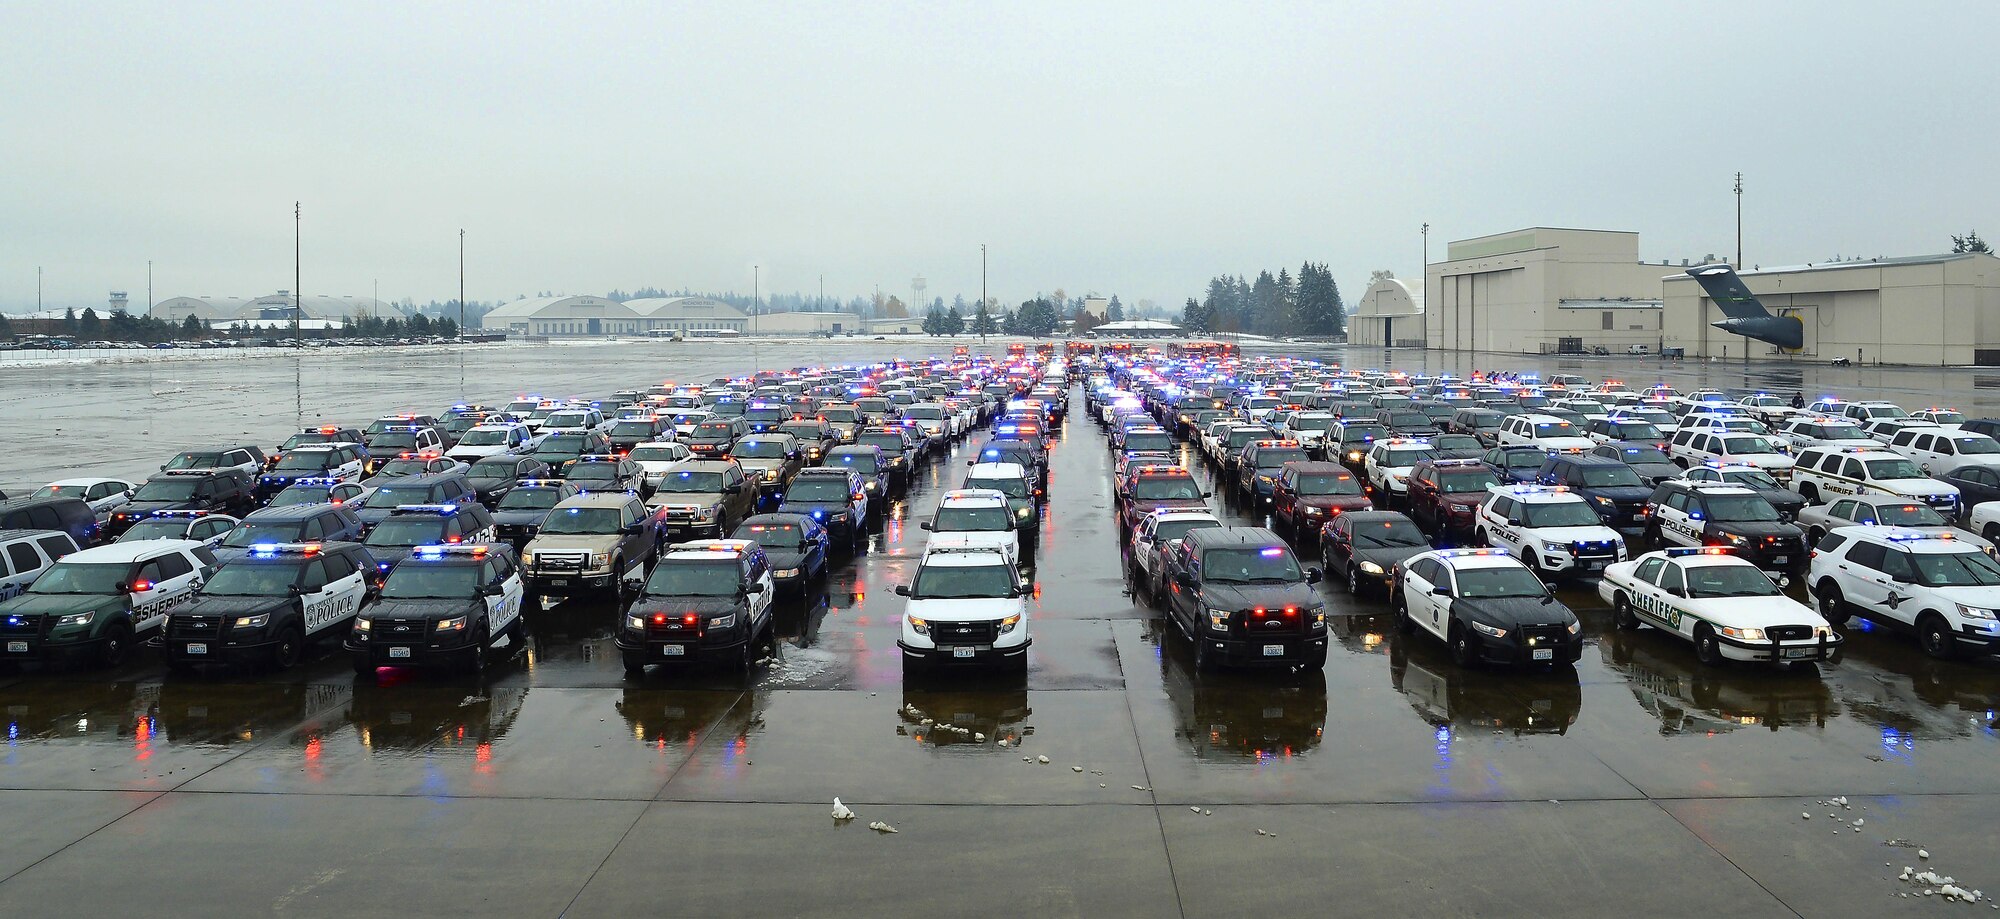 More than 450 emergency response vehicles prepare to leave the McChord Filed flightline on Joint Base Lewis-McChord, Wash., Dec. 9, 2016. The vehicles staged at JBLM for the funeral procession of Tacoma Police Officer Reginald “Jake” Gutierrez. Officer Gutierrez was killed in the line of duty Nov. 30, 2016. (U.S. Air Force photo/Tech. Sgt. Sean Tobin)